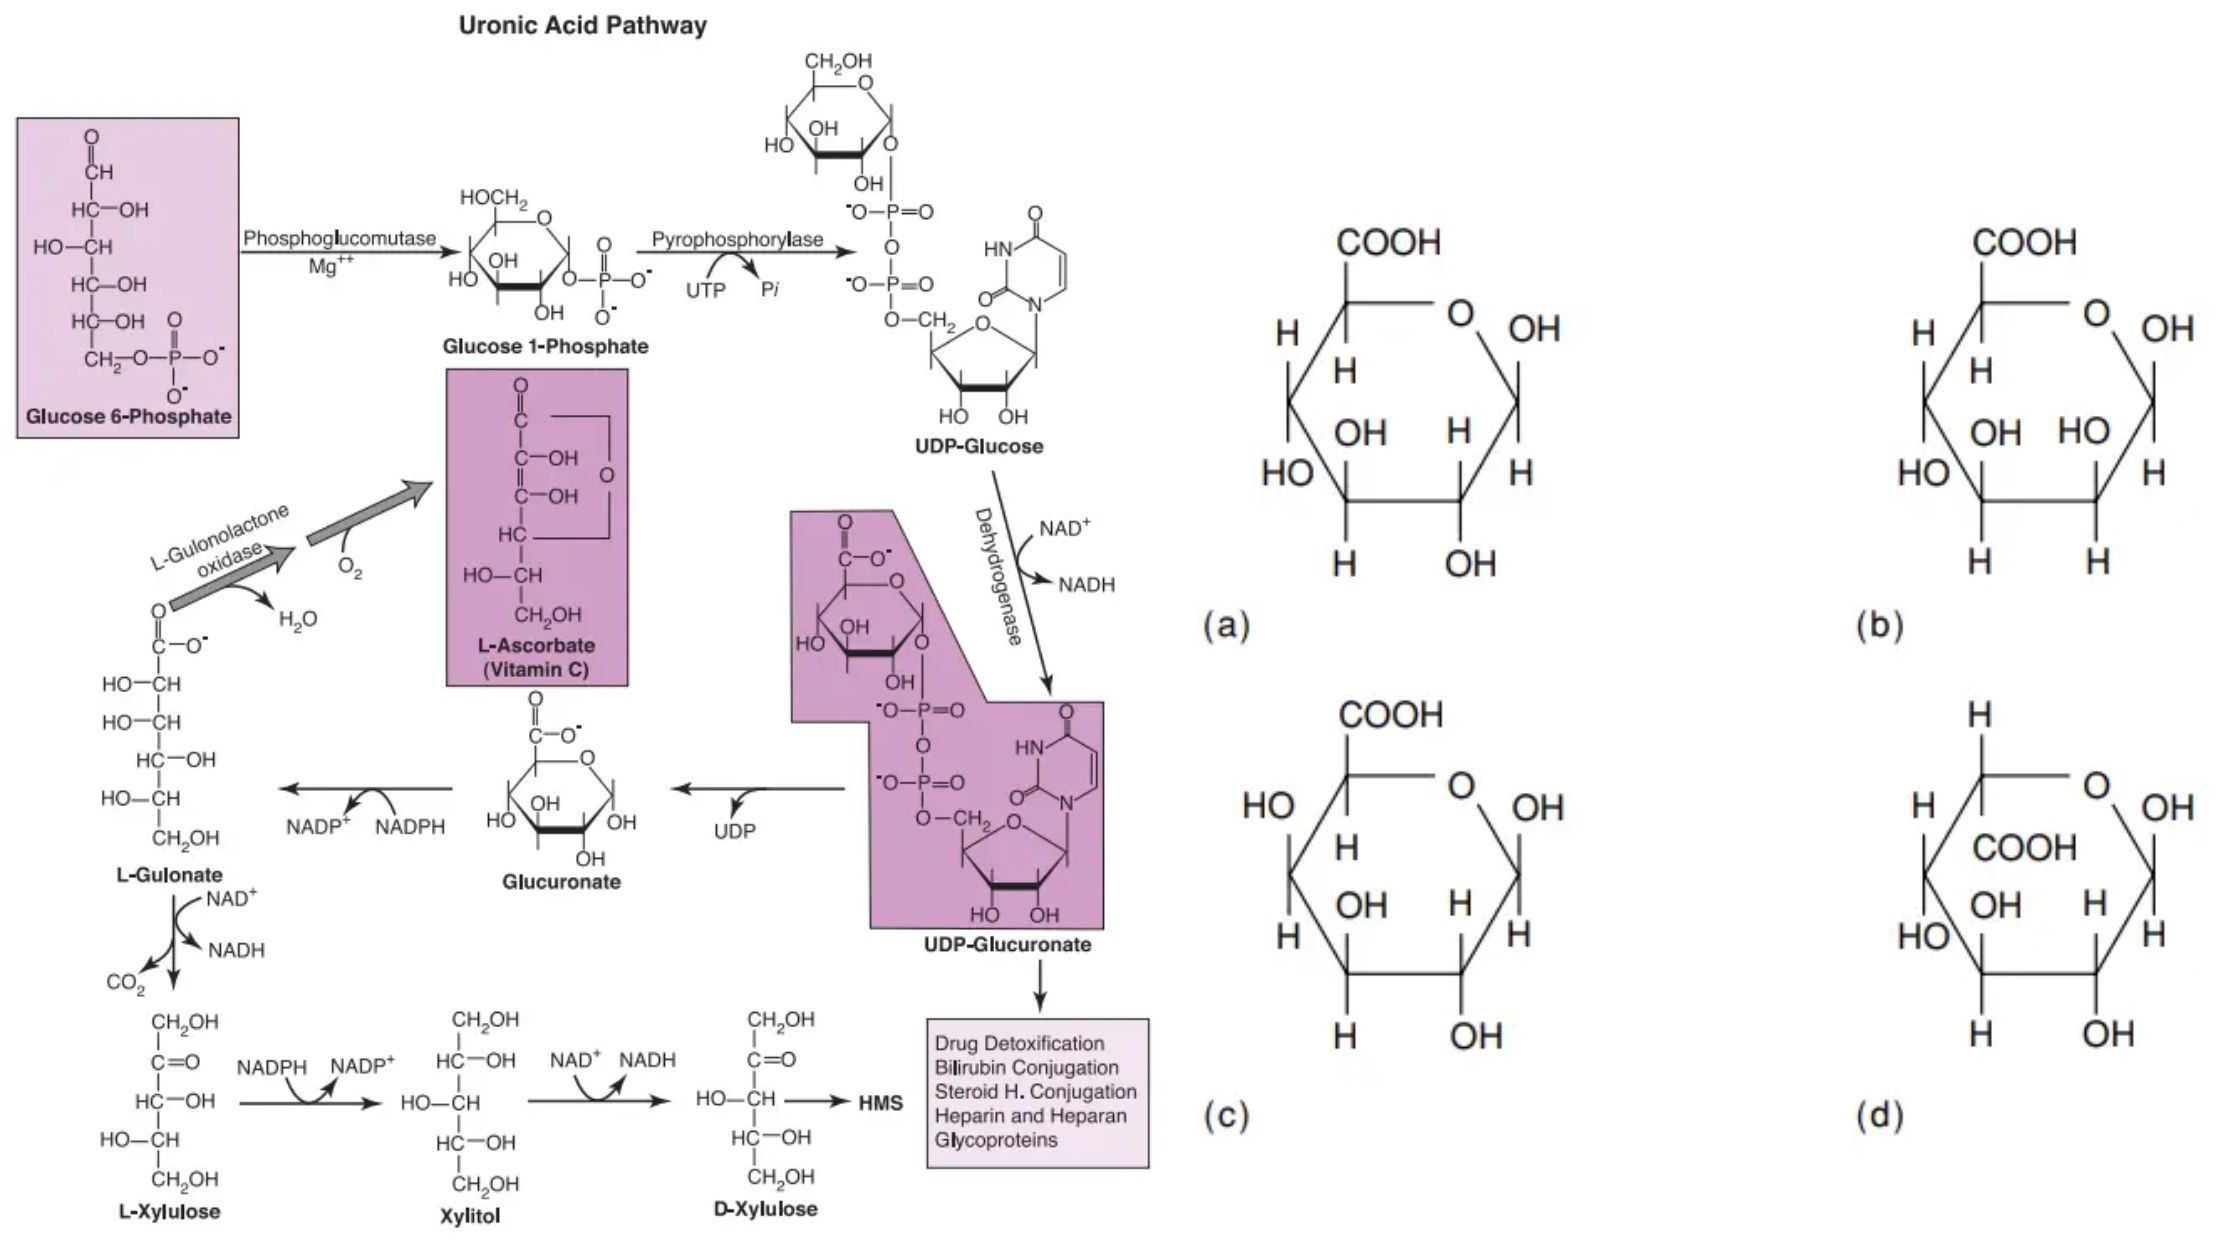 Uronic Acid Pathway - Definition, Enzymes, Steps, Importance